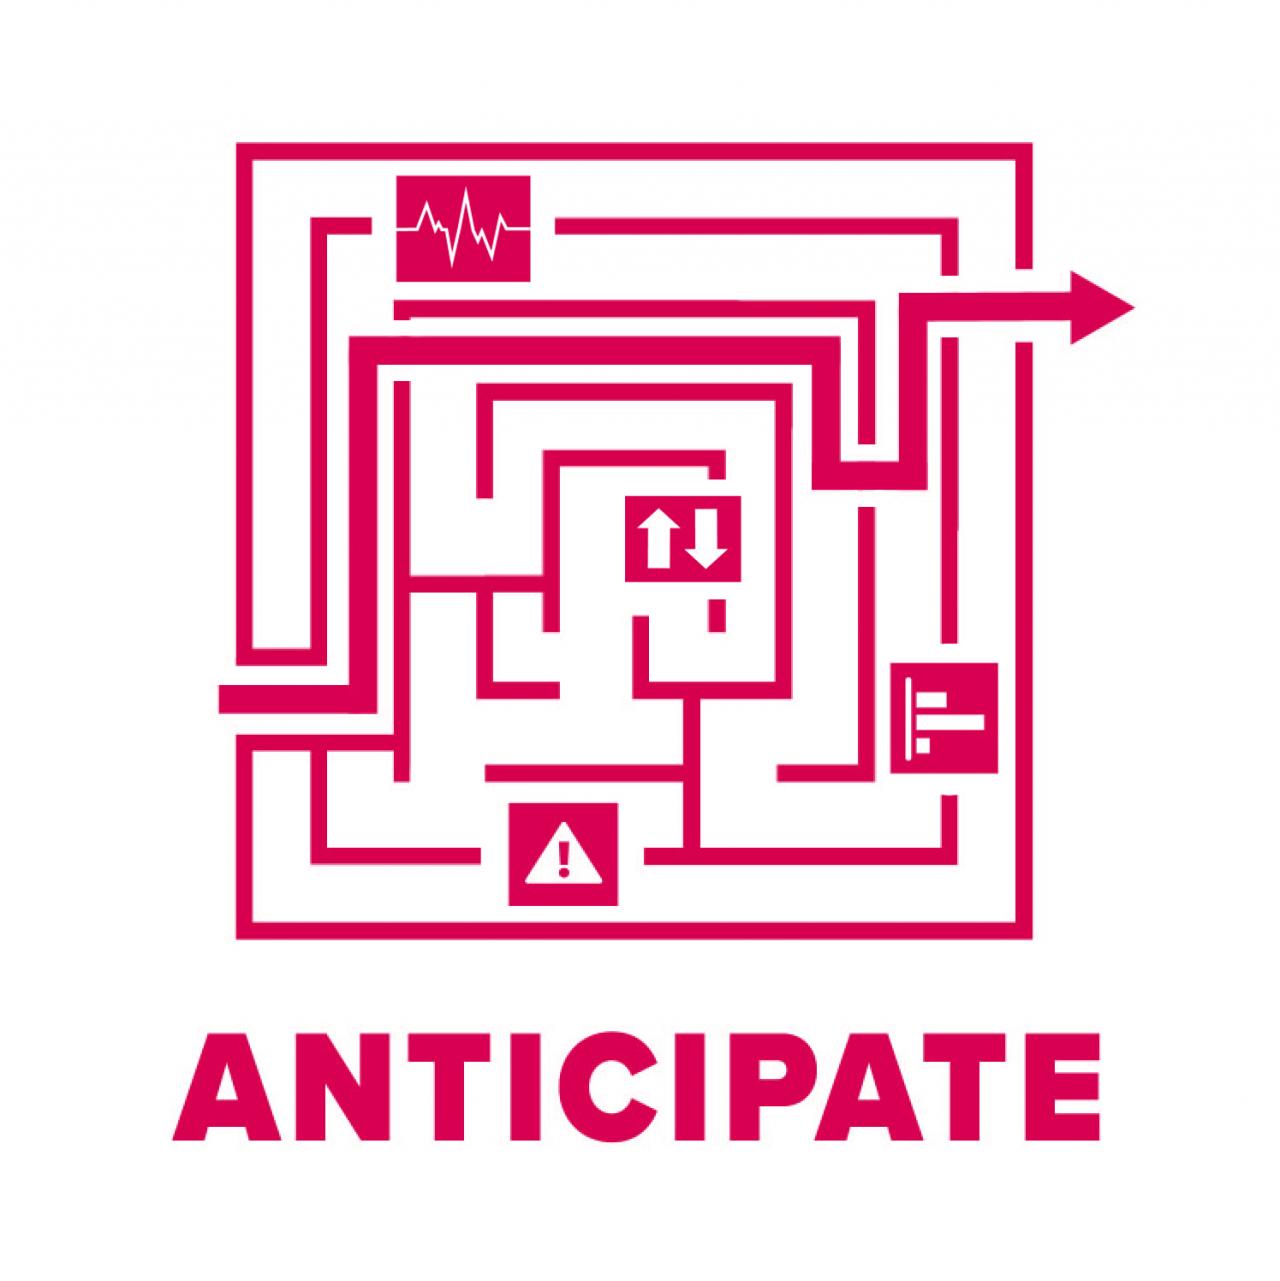 A red and white maze graphic with various icons representing data and dangers. An arrow finds its way through the maze to the other side. The title at the bottom reads "Anticipate"